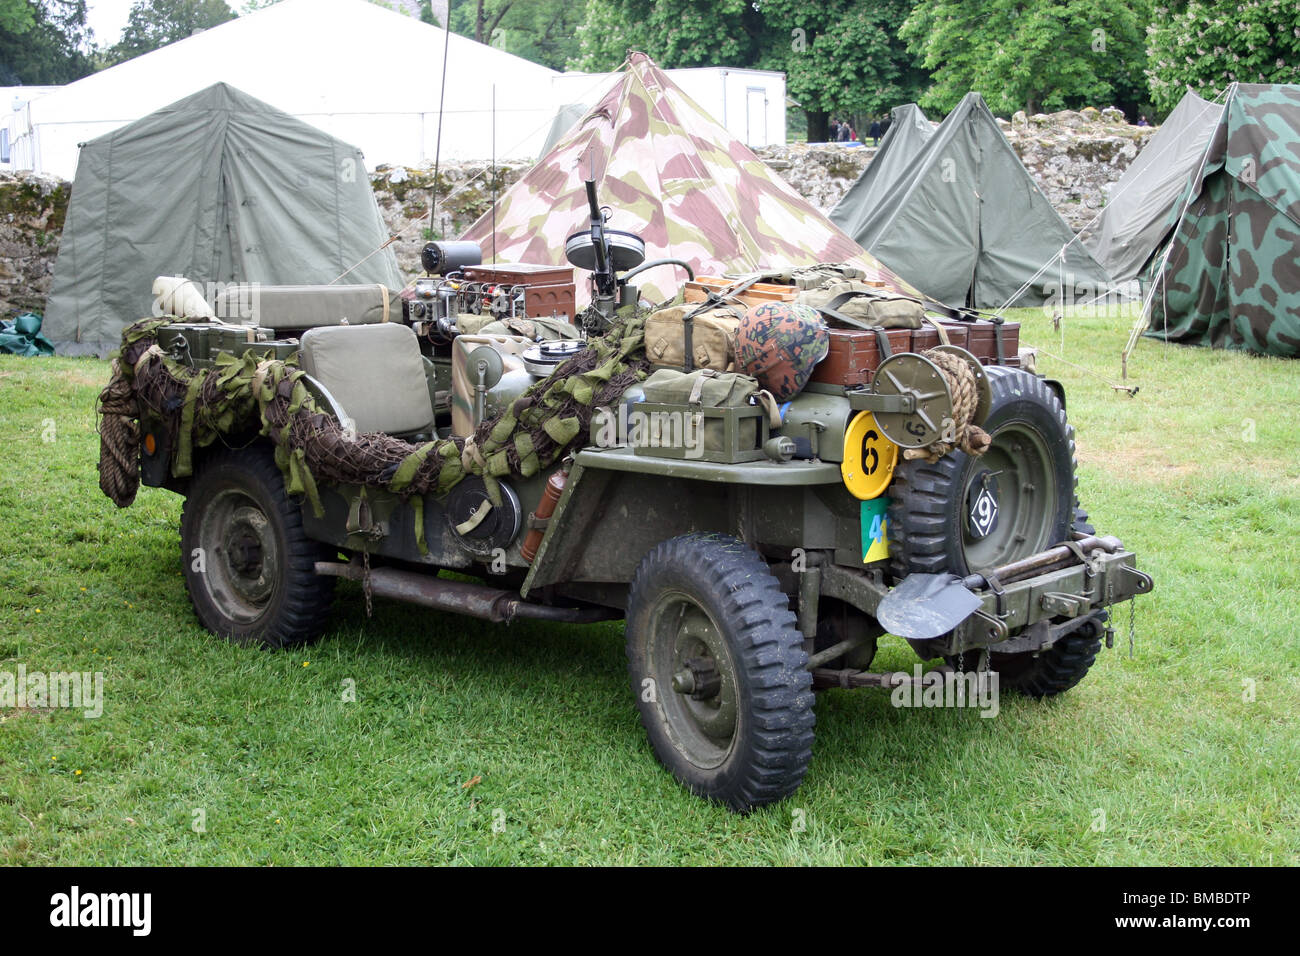 Heavily loaded army Jeep at a Trucks and Troops show Stock Photo